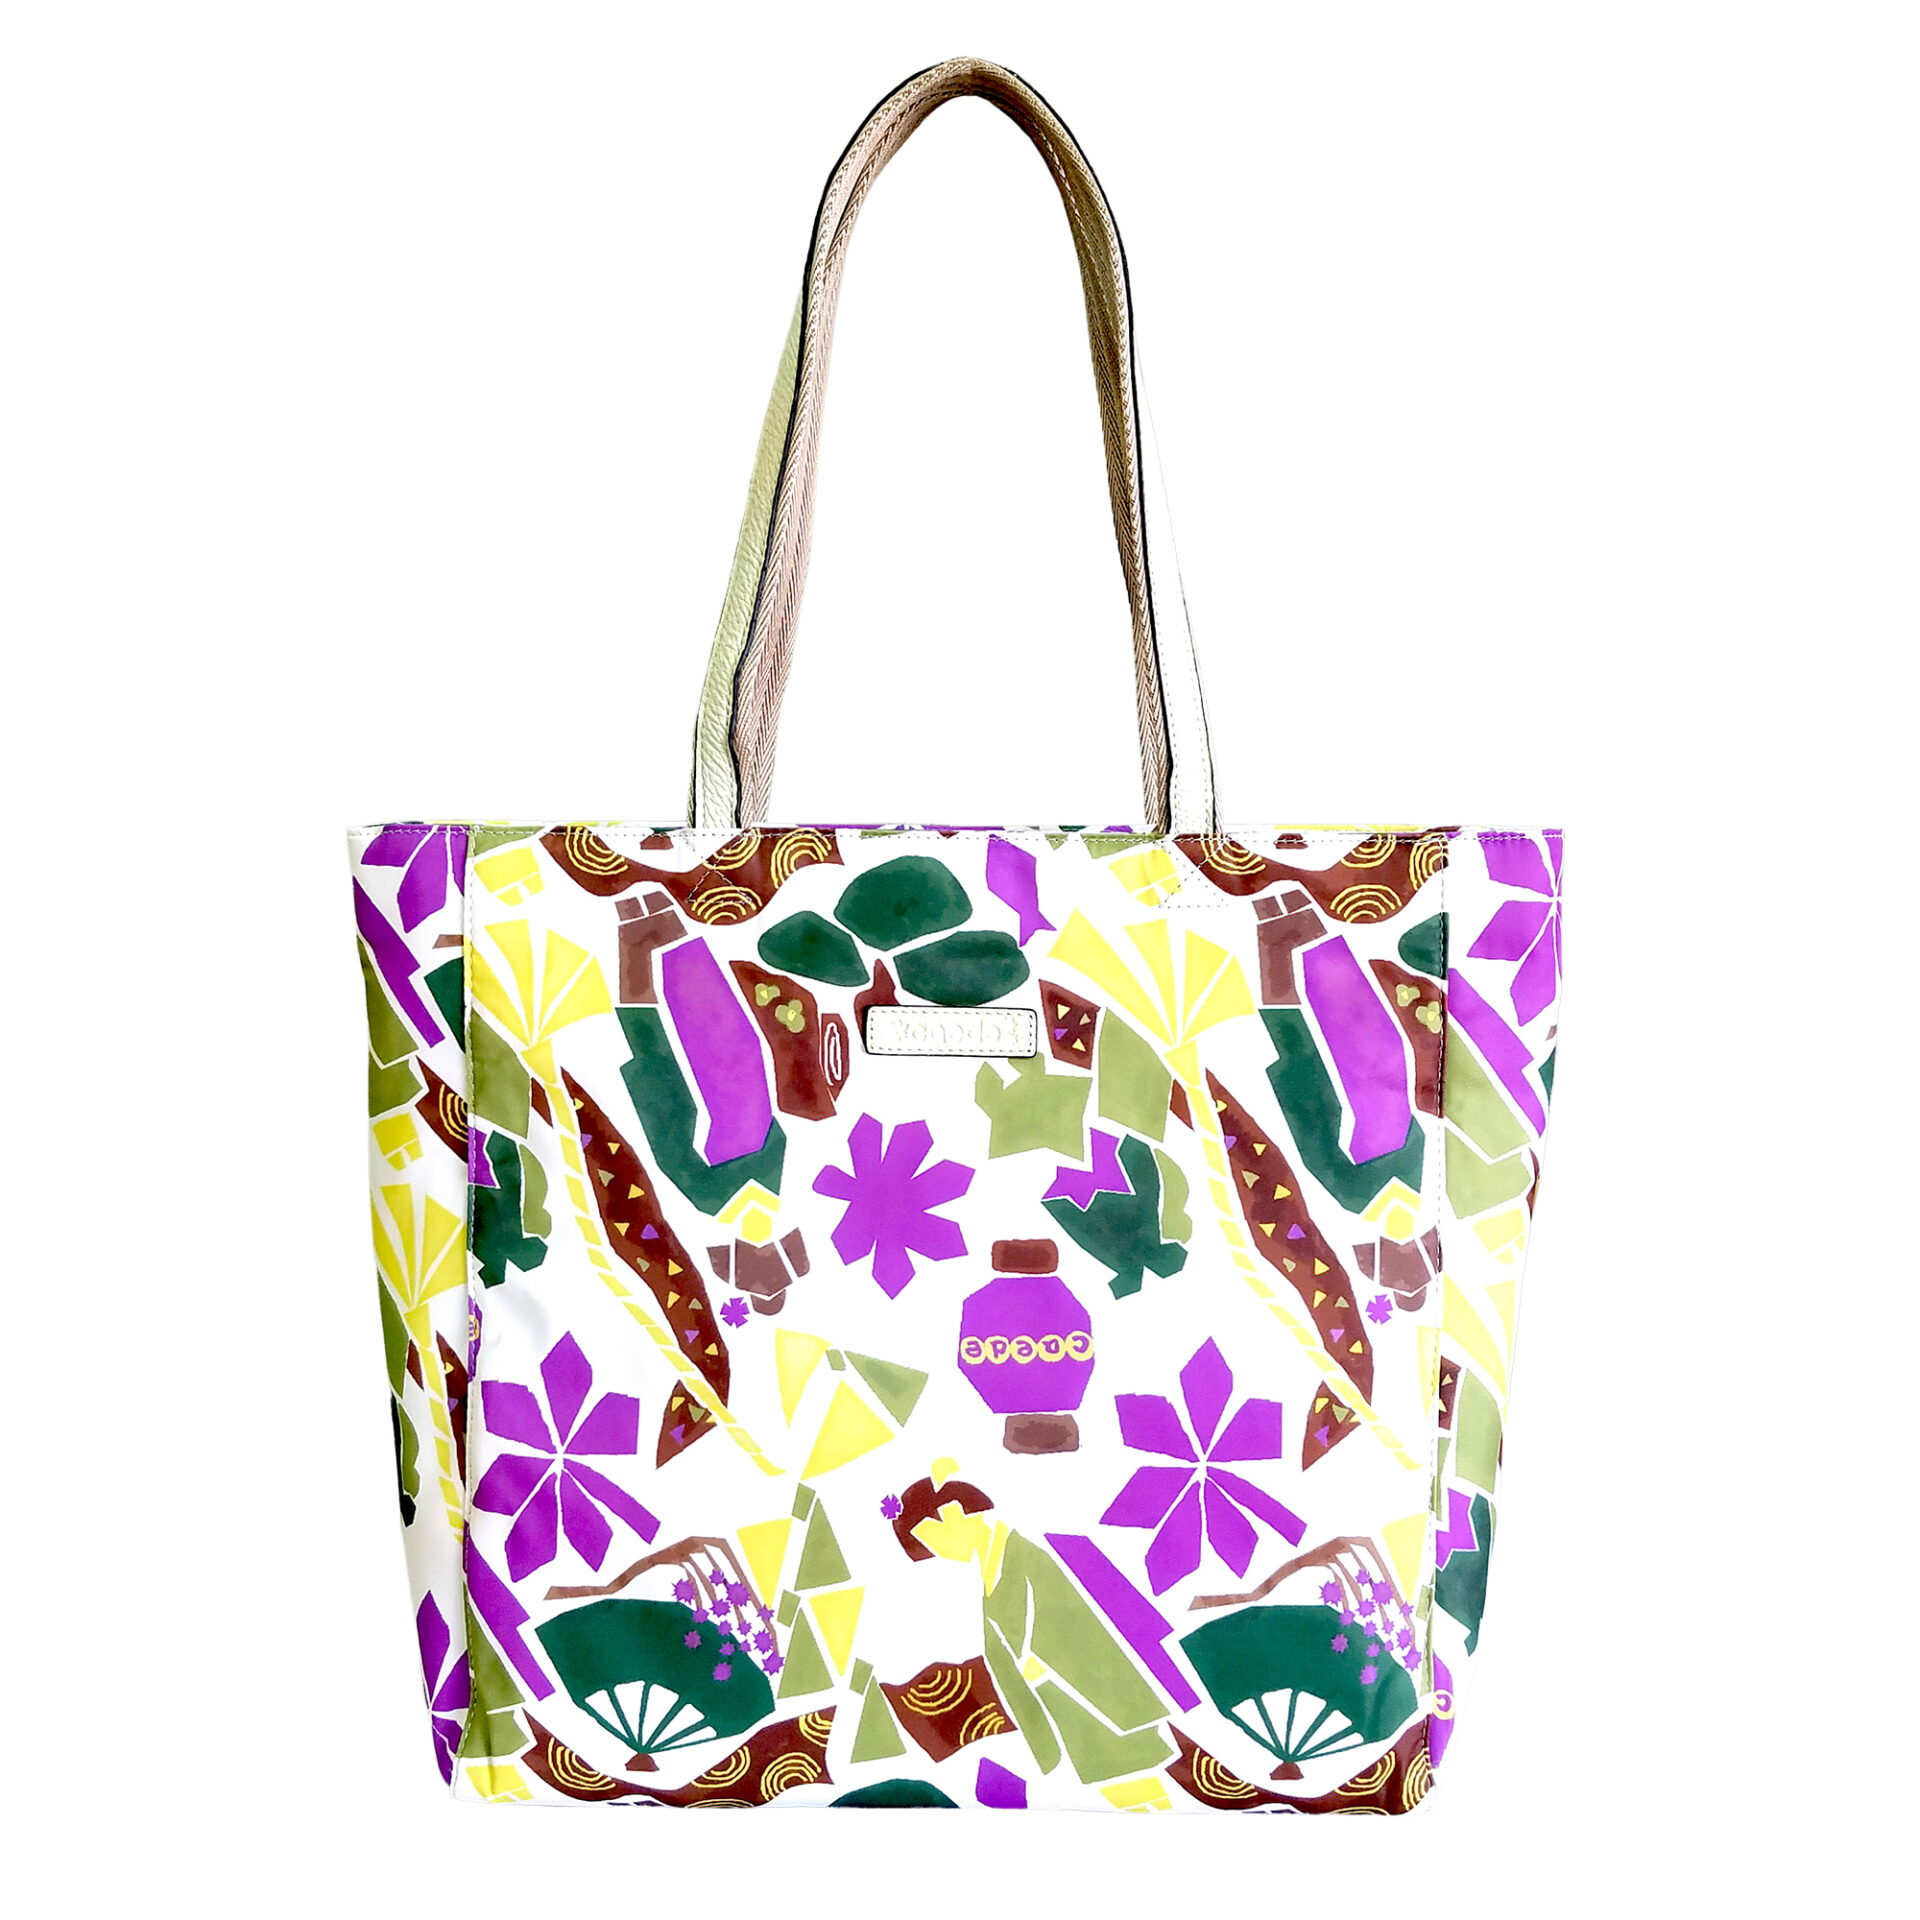 Maiko Puzzle Linate Tote ivory